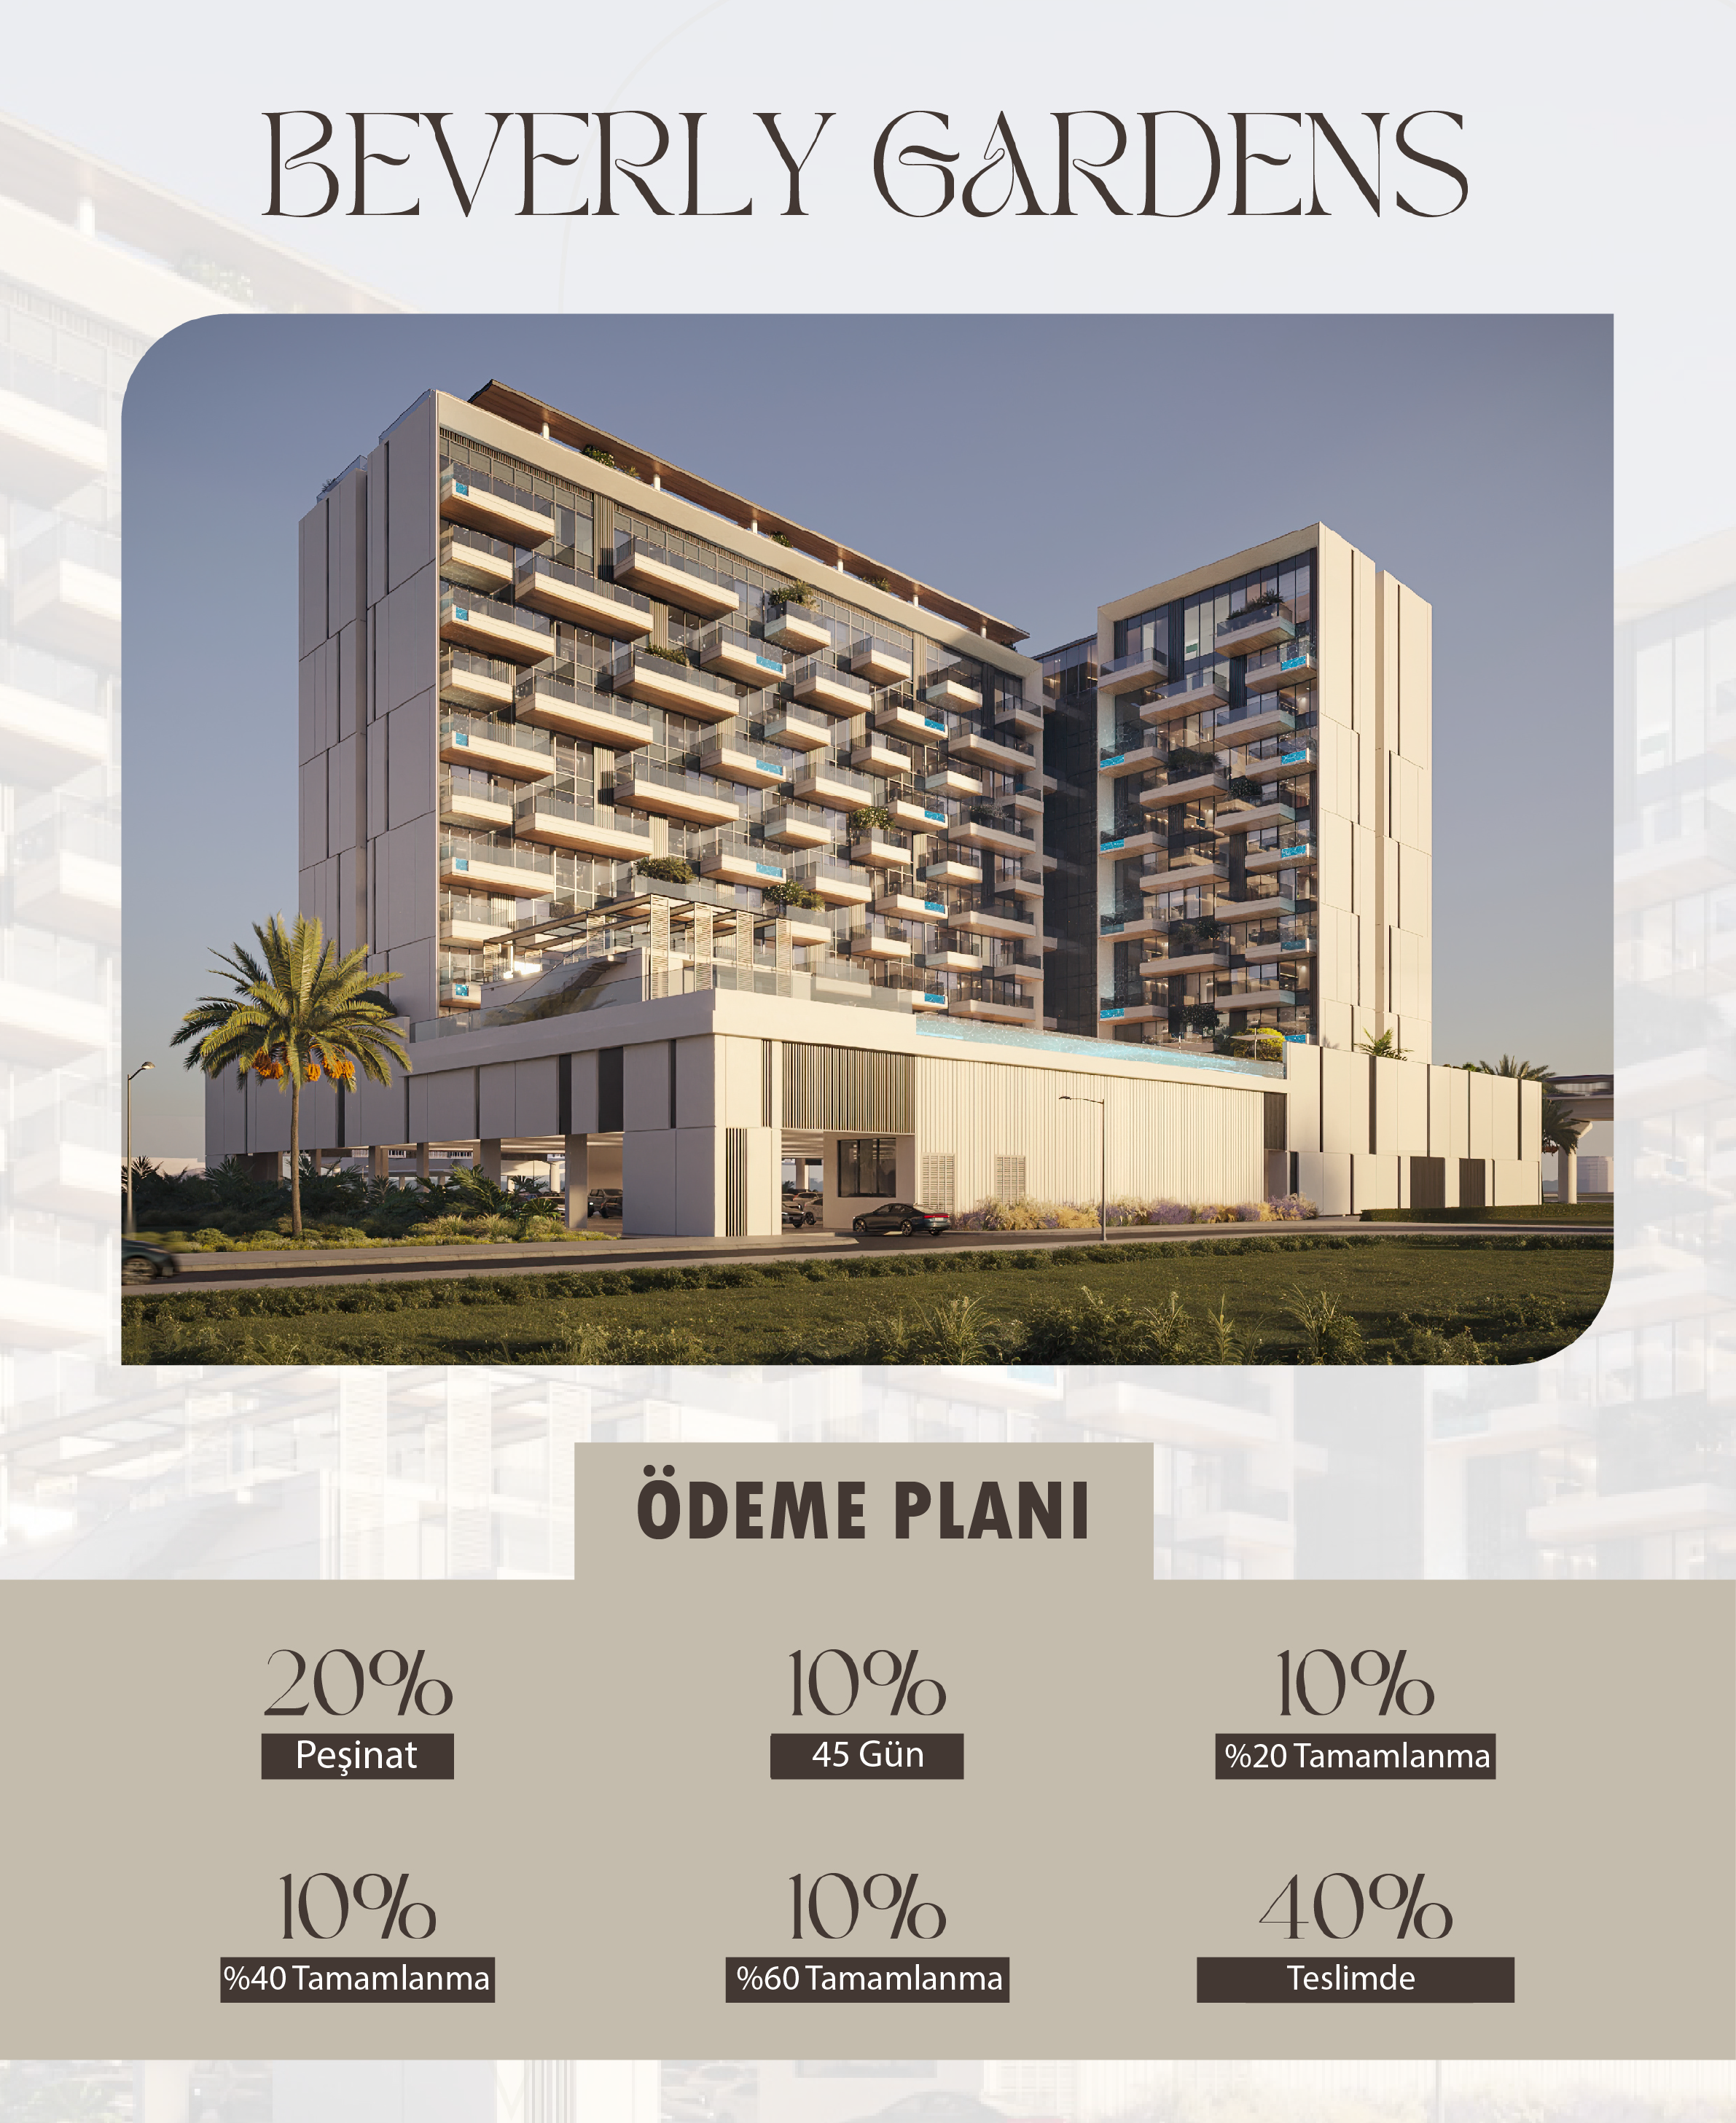 BEVERLY GARDENS: Investment Opportunity